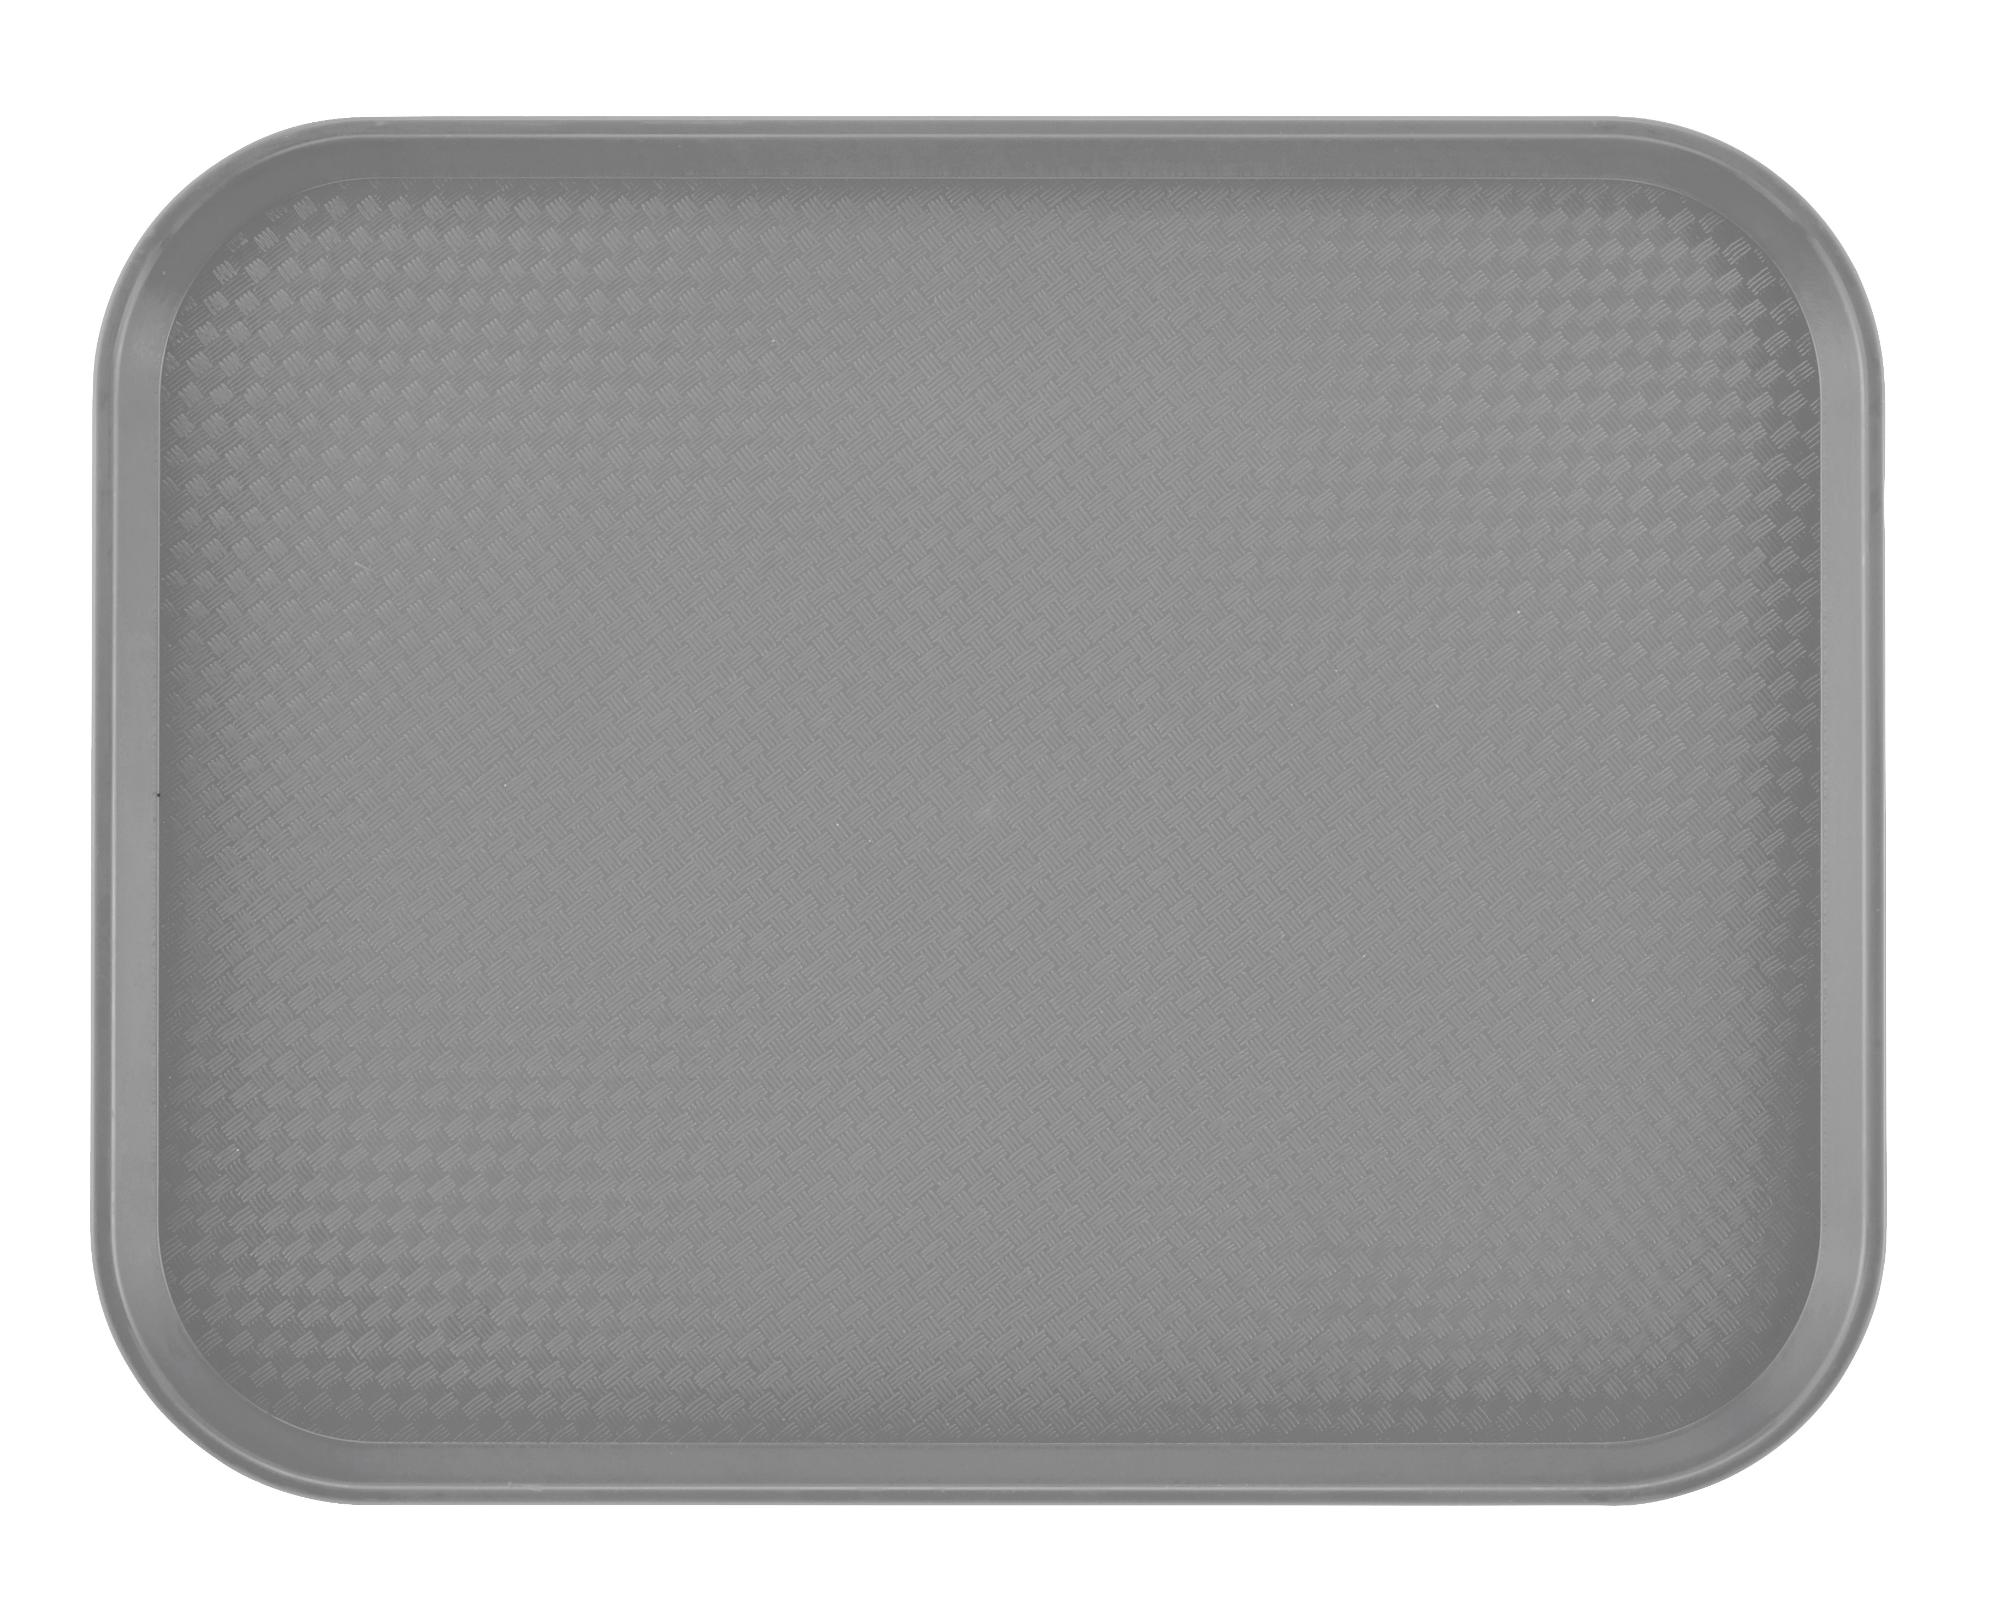 Fast Food polypropylene tray, textured surface, grey, 300x410 mm